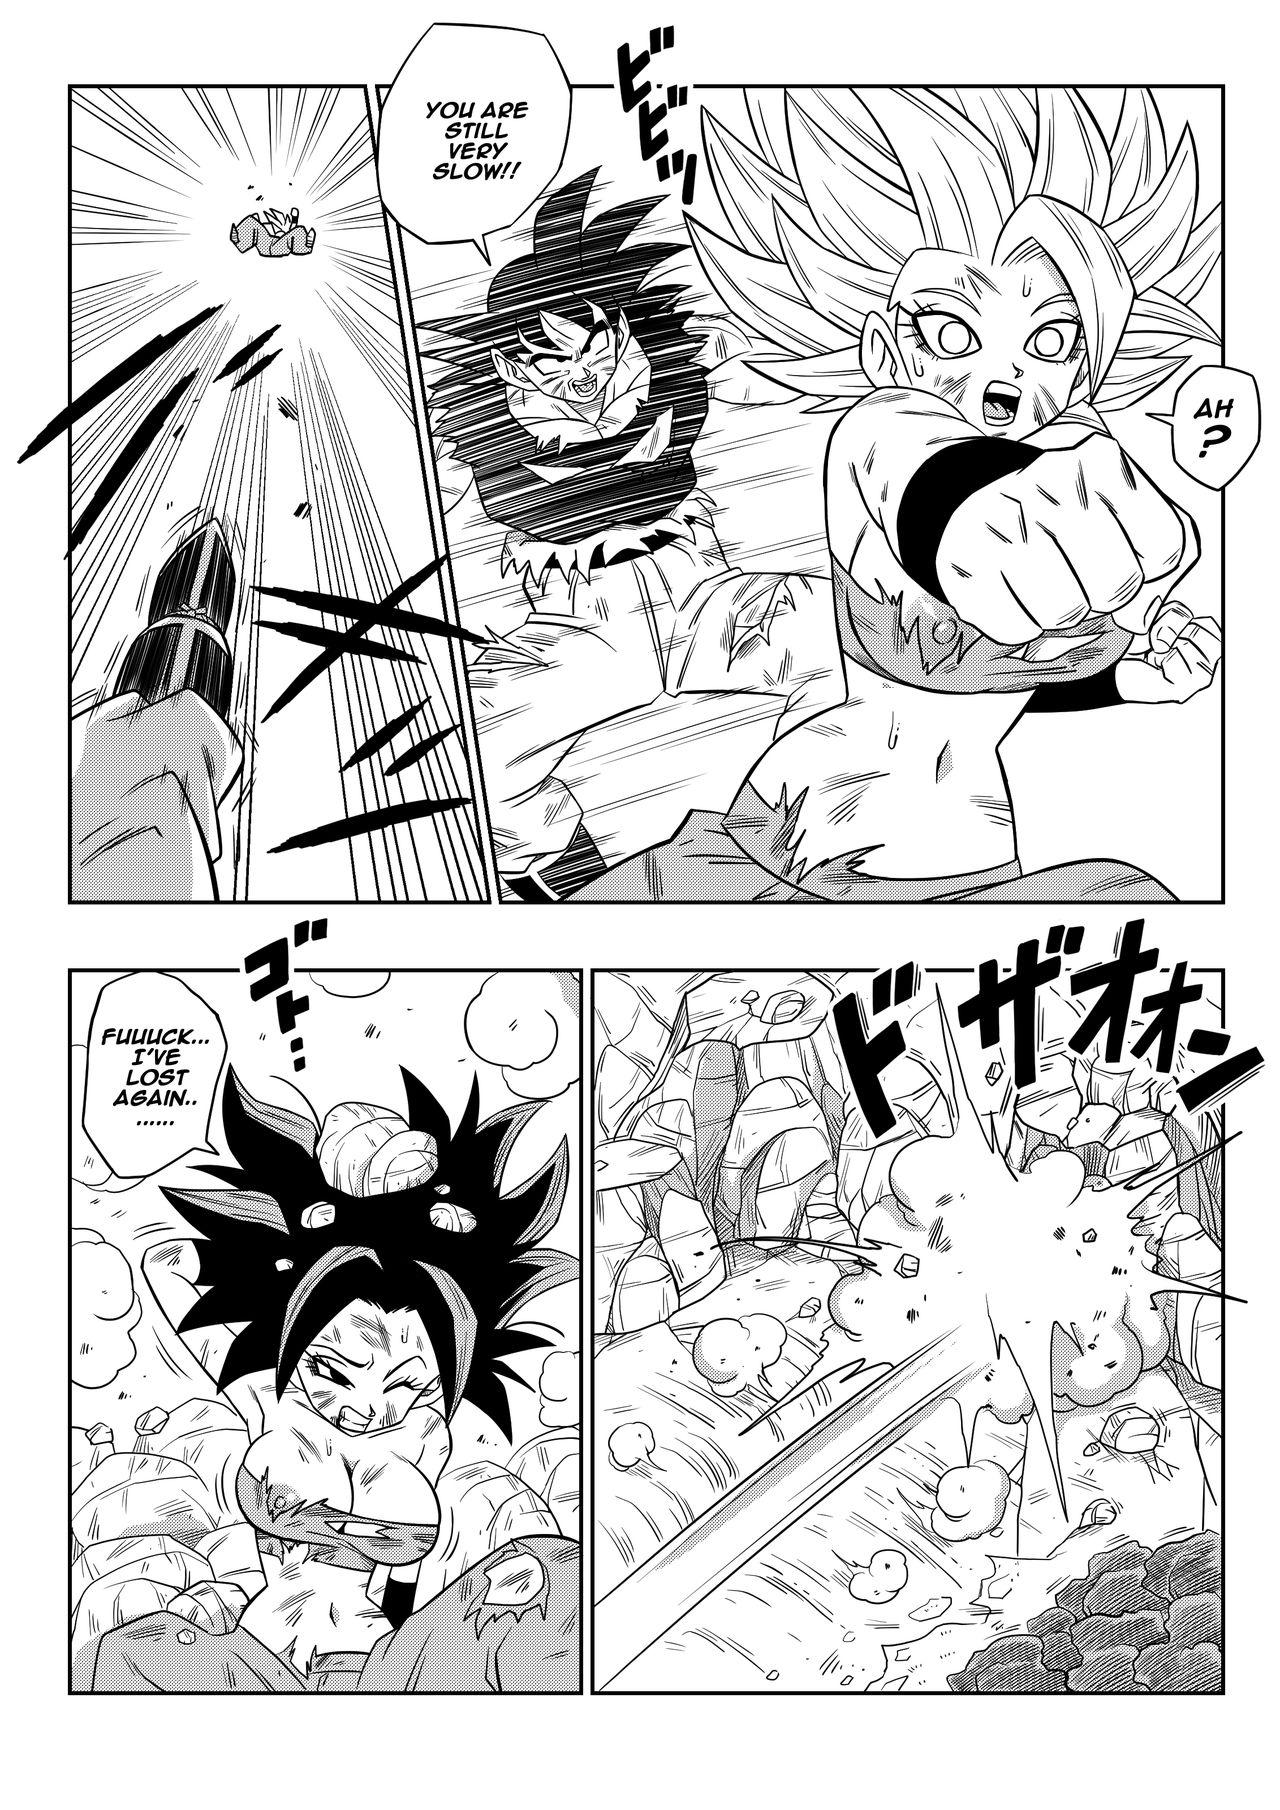 Pervert Fight in the 6th Universe!!! - Dragon ball super Hardcore Rough Sex - Page 5